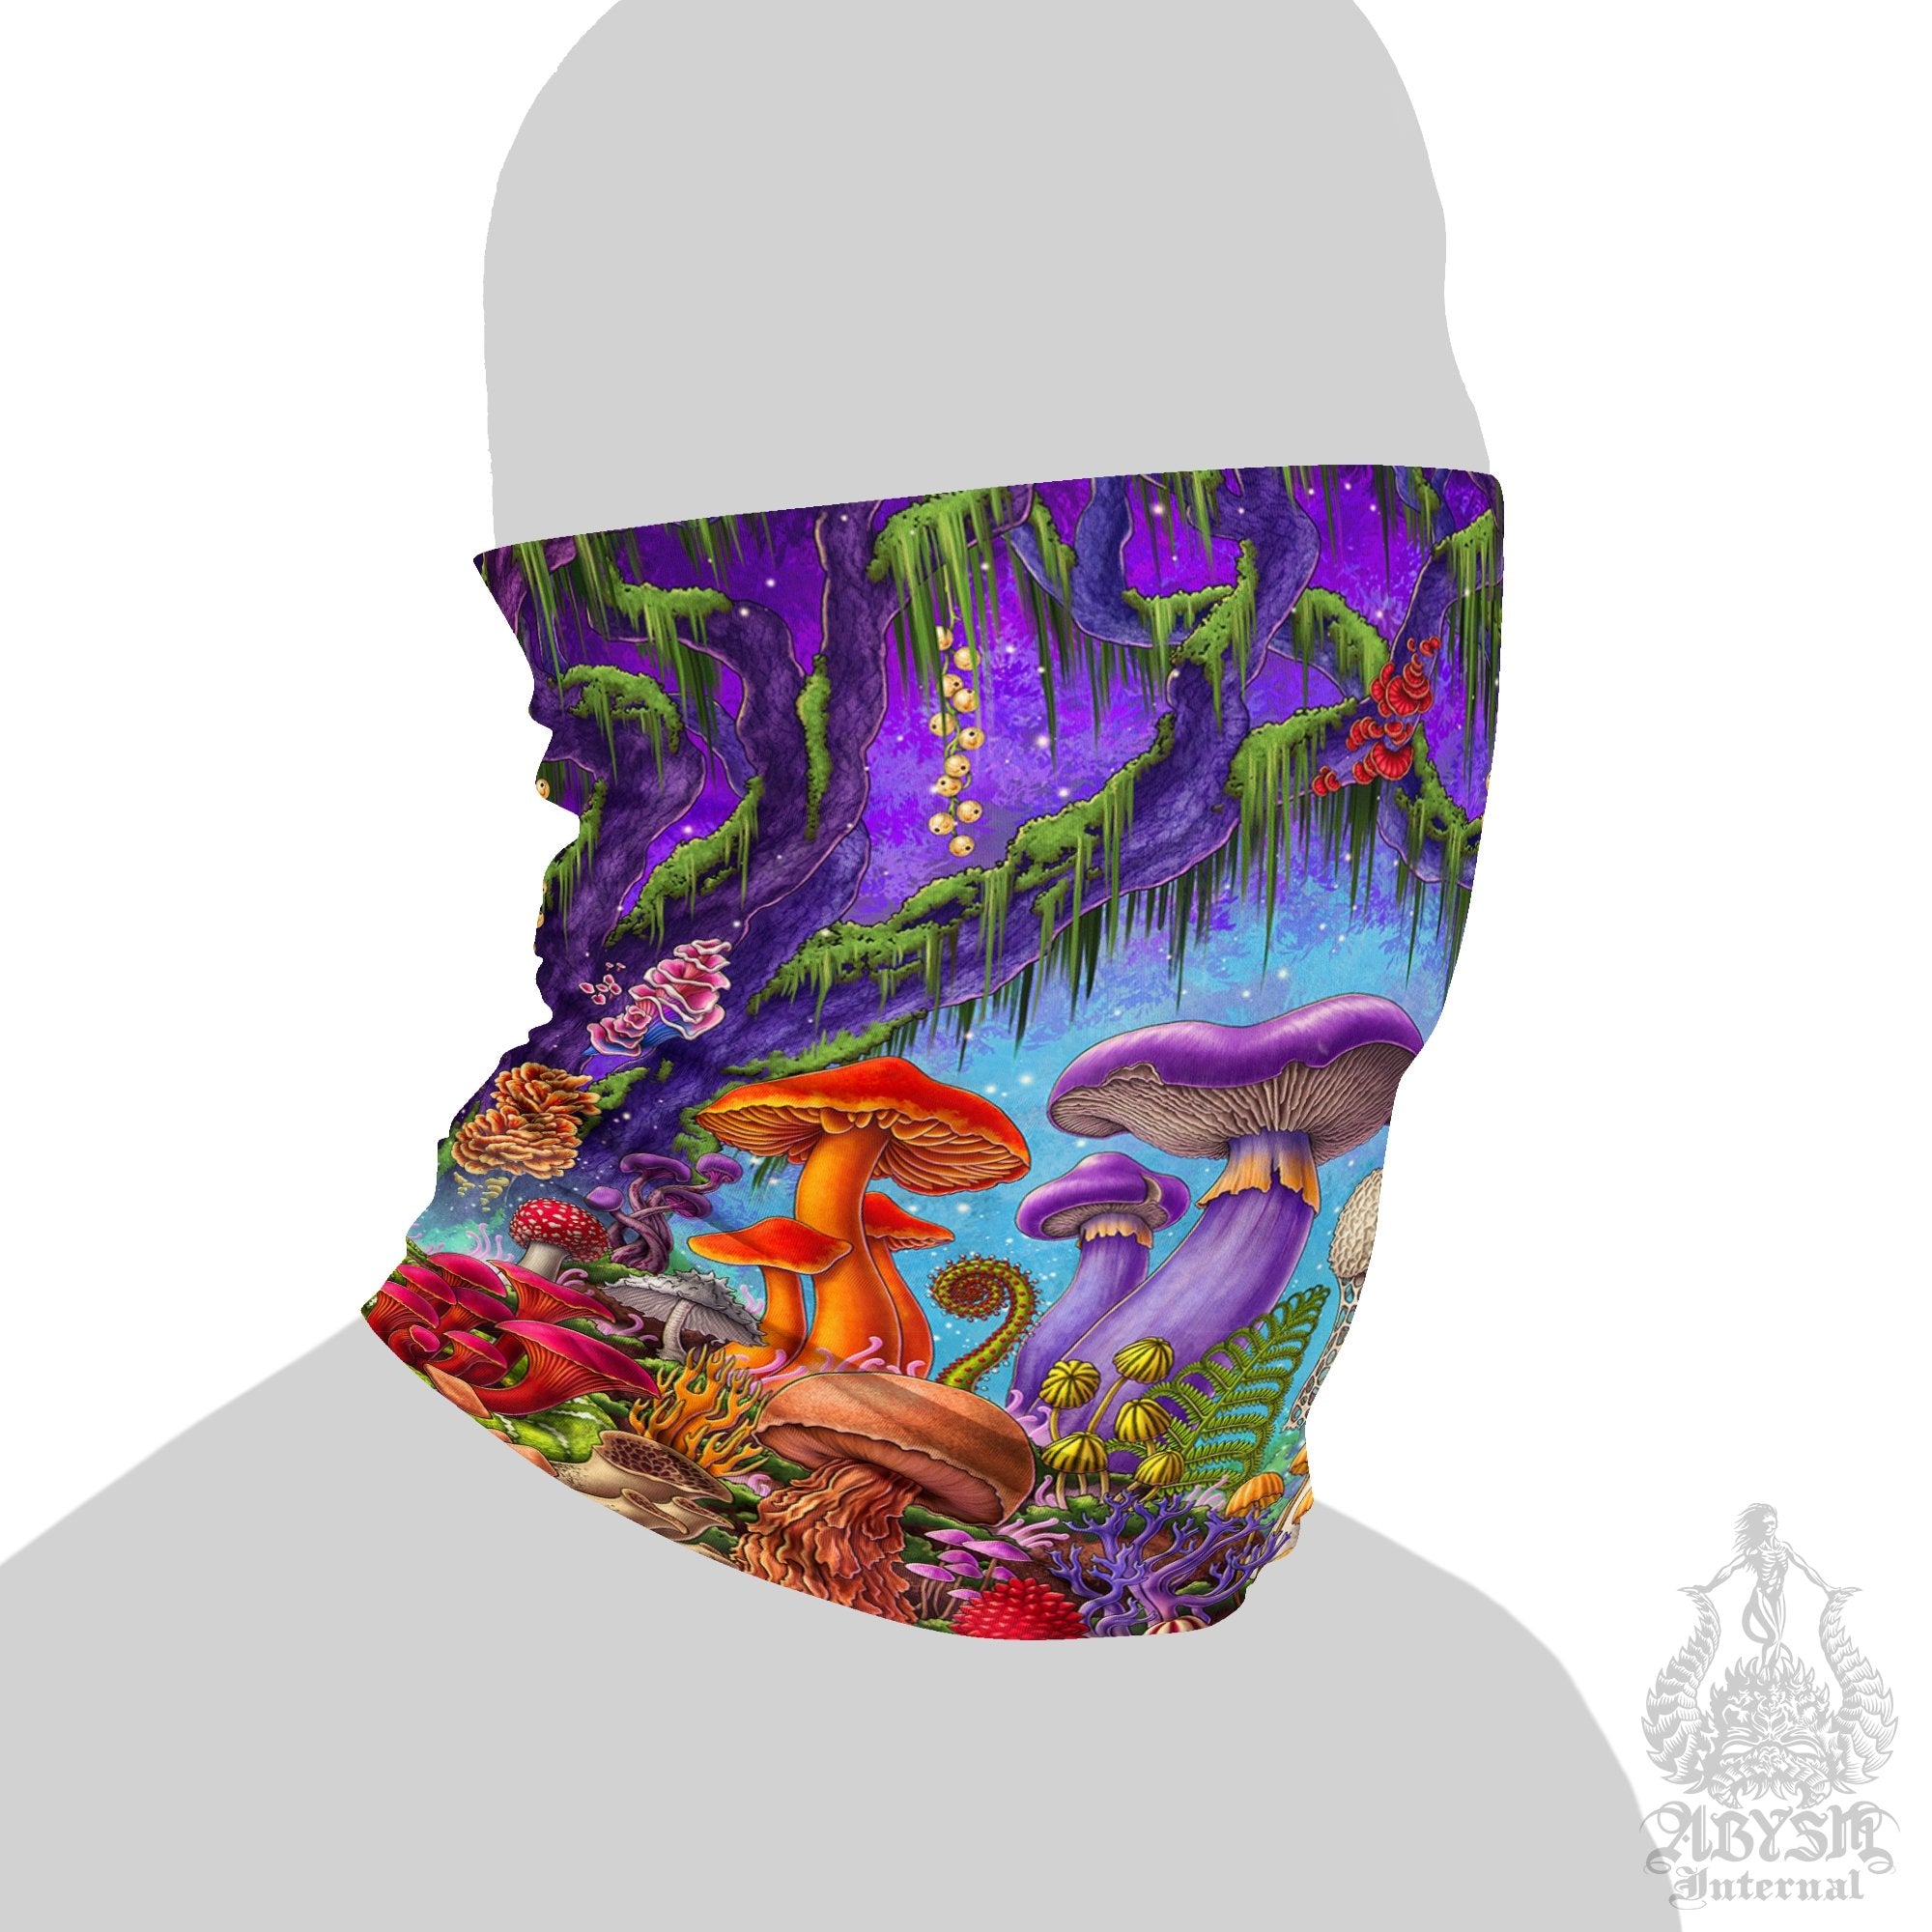 Mushrooms Neck Gaiter, Face Mask, Head Covering, Magic Shrooms Art, Indie Festival Outfit, Mycologyst Gift - Original - Abysm Internal